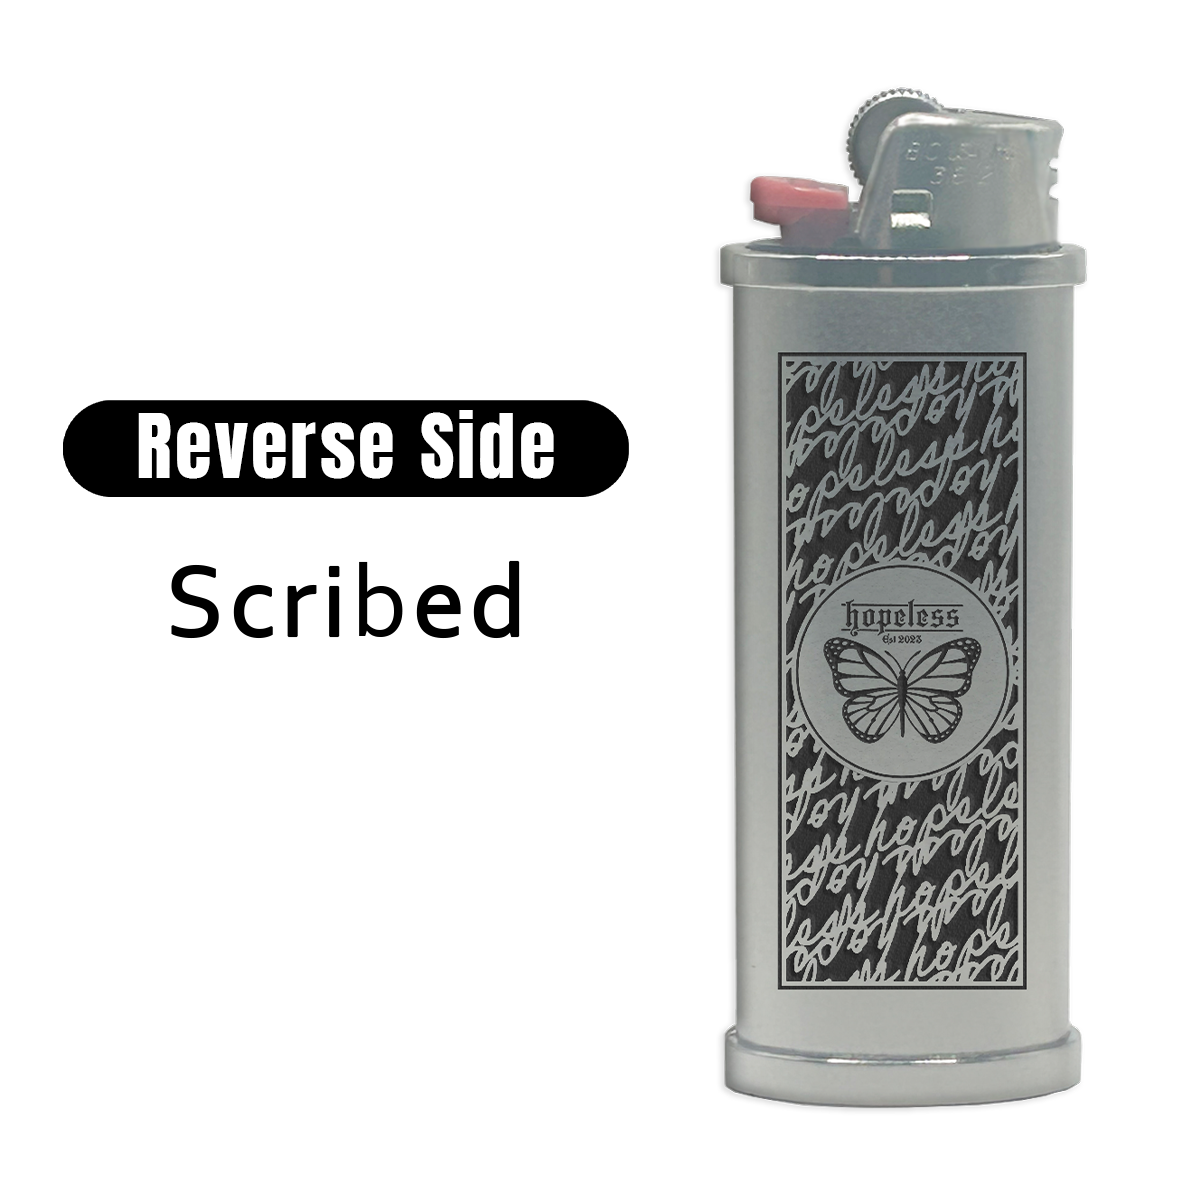 No Time to Die Engraved Lighter